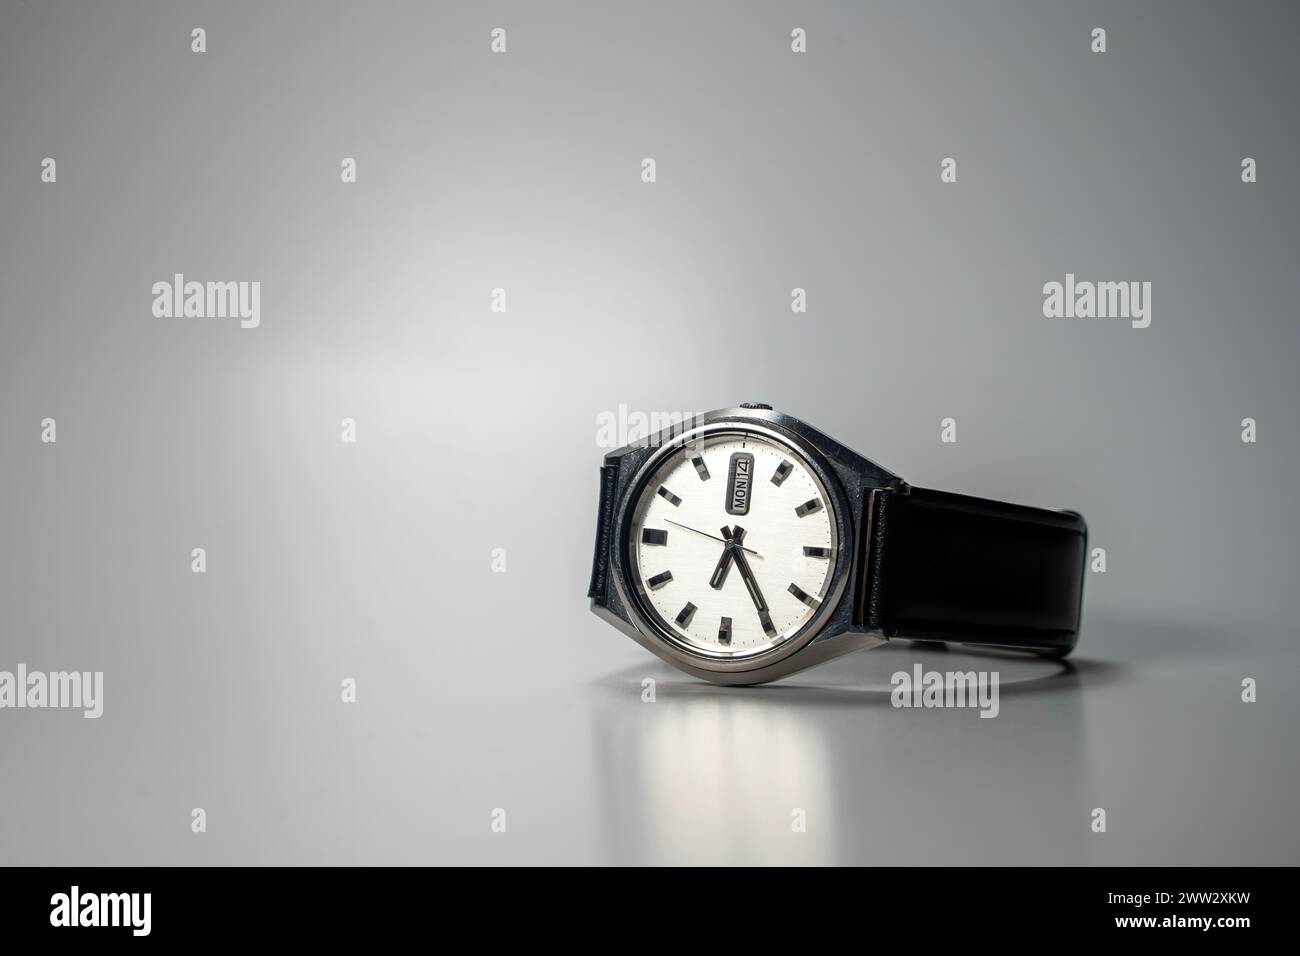 Vintage Automatic Wrist Watch With Leather Strap, Placed On Gray Surface Stock Photo